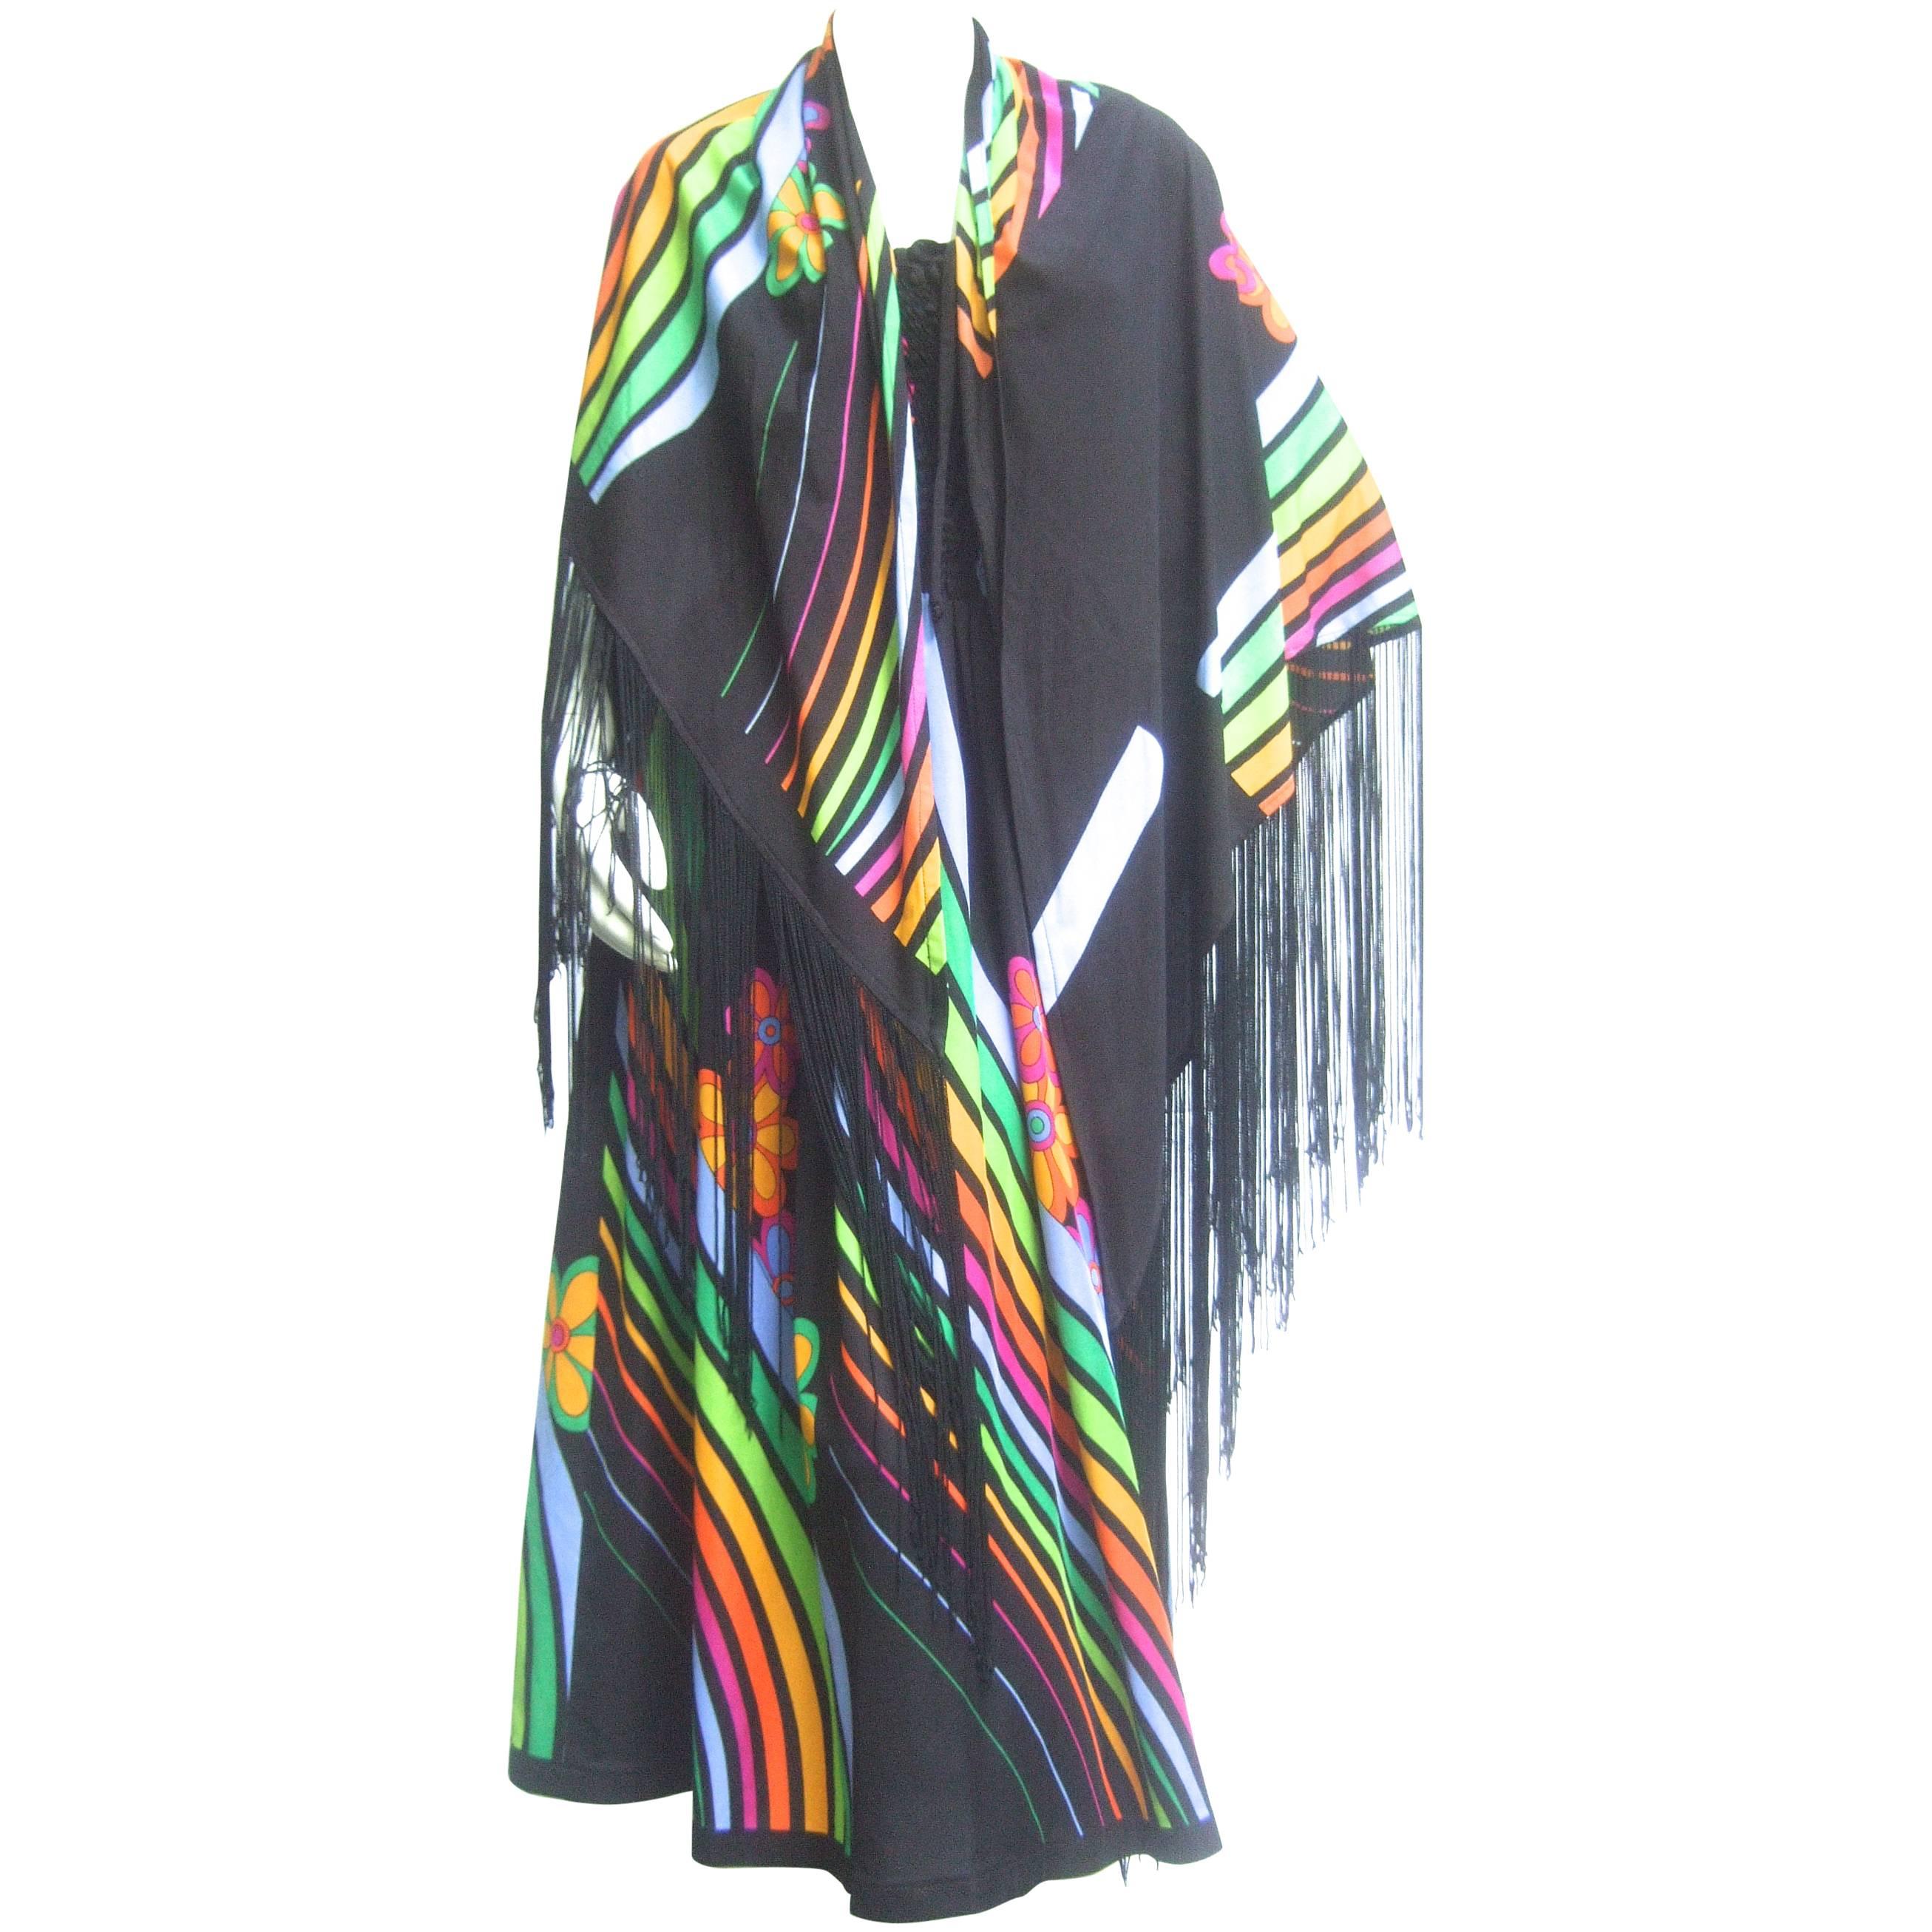 Super Cool 70's Bodice Dress with Fringed Cape. For Sale